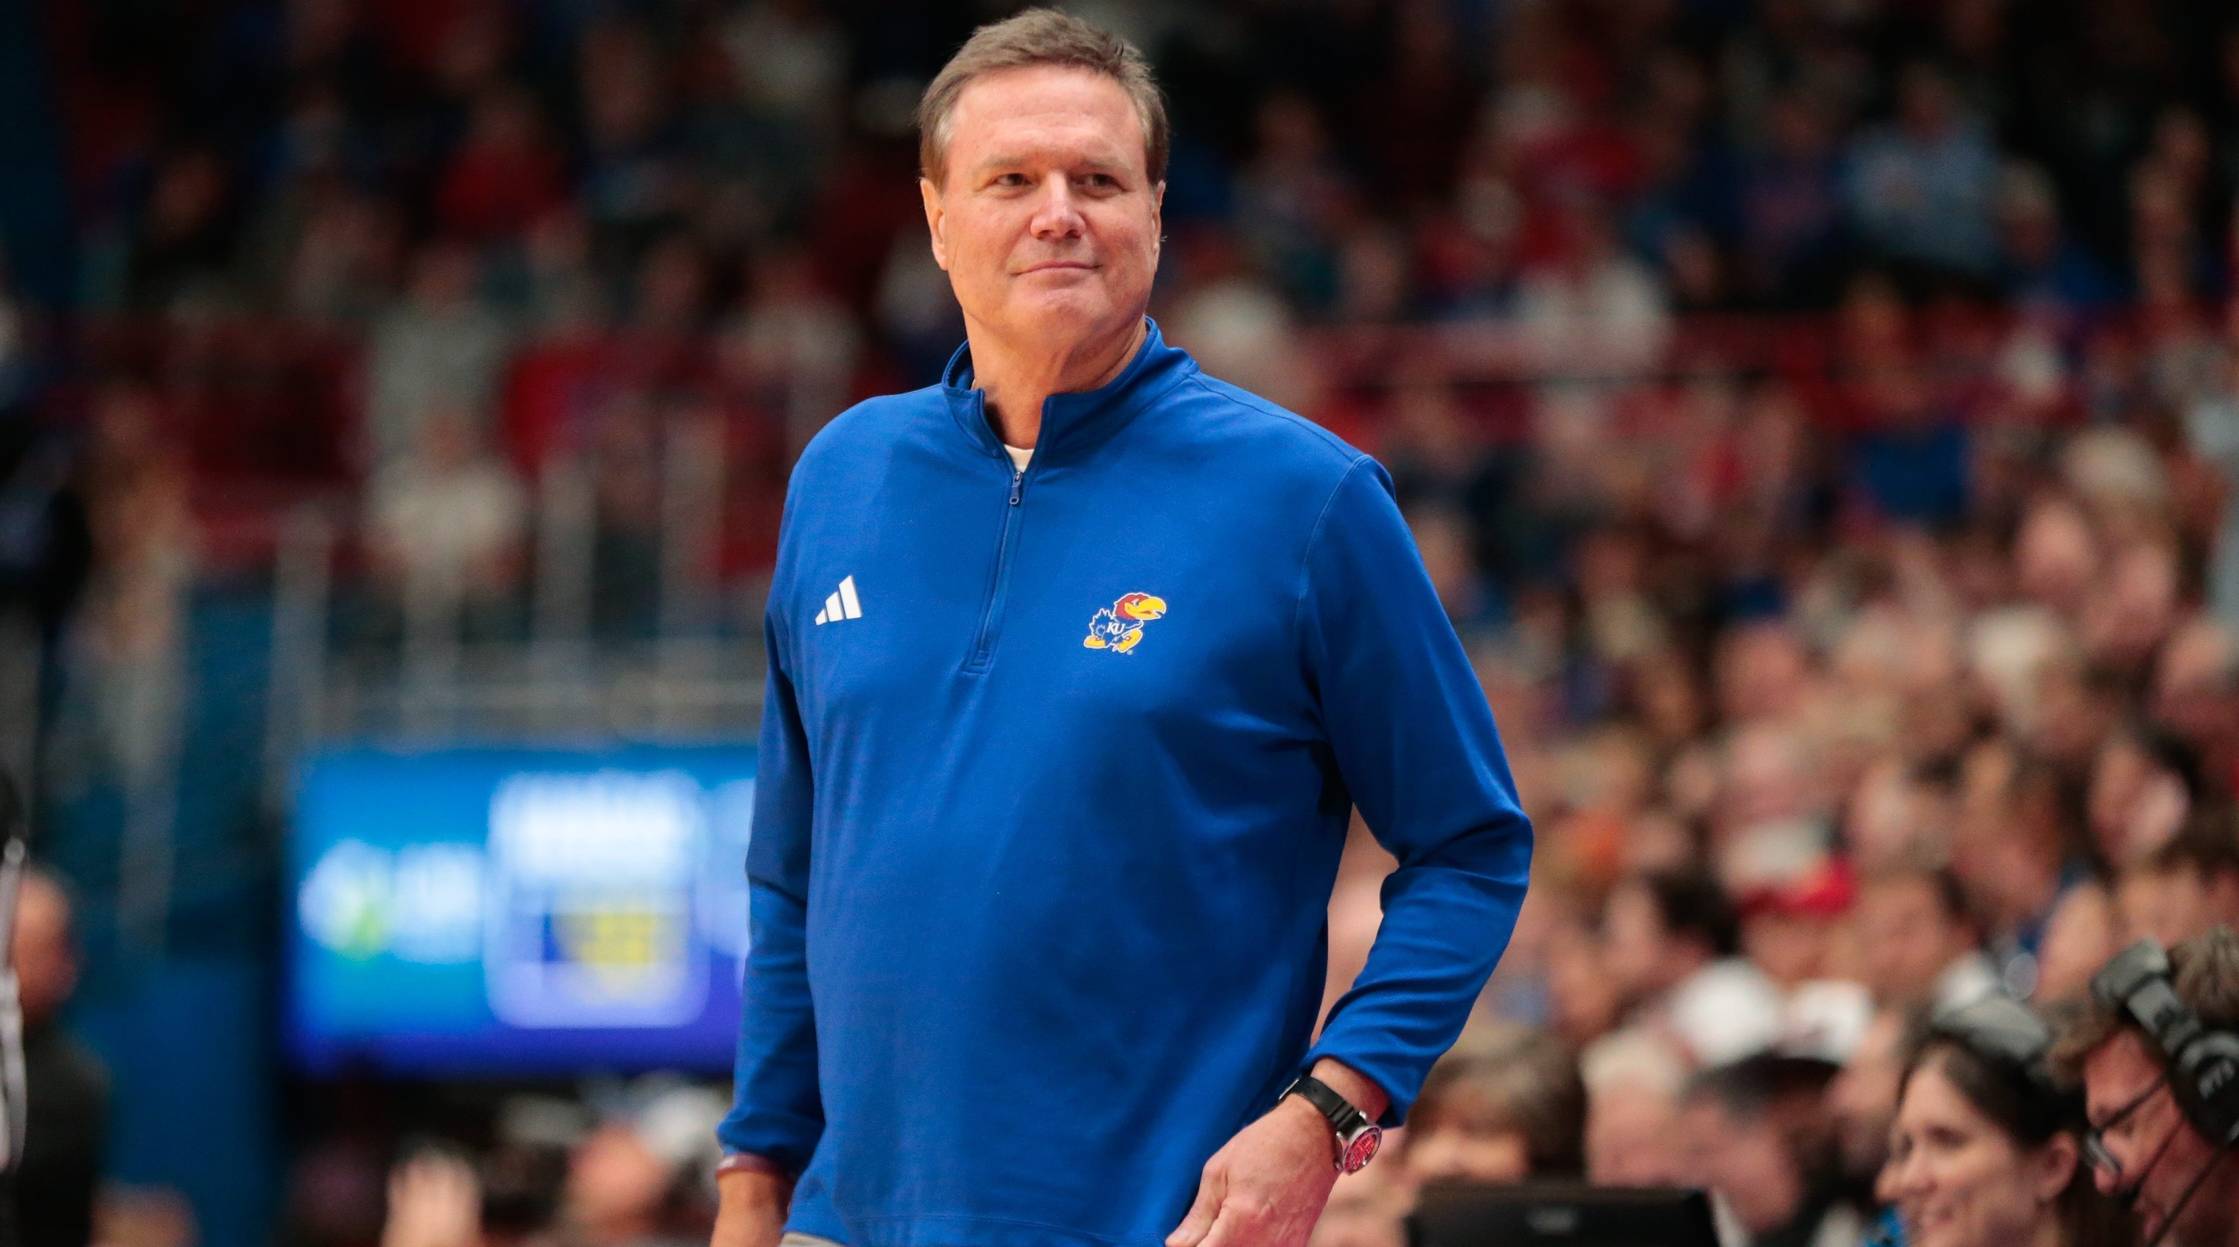 Kansas head coach Bill Self looks on while coaching in a game.